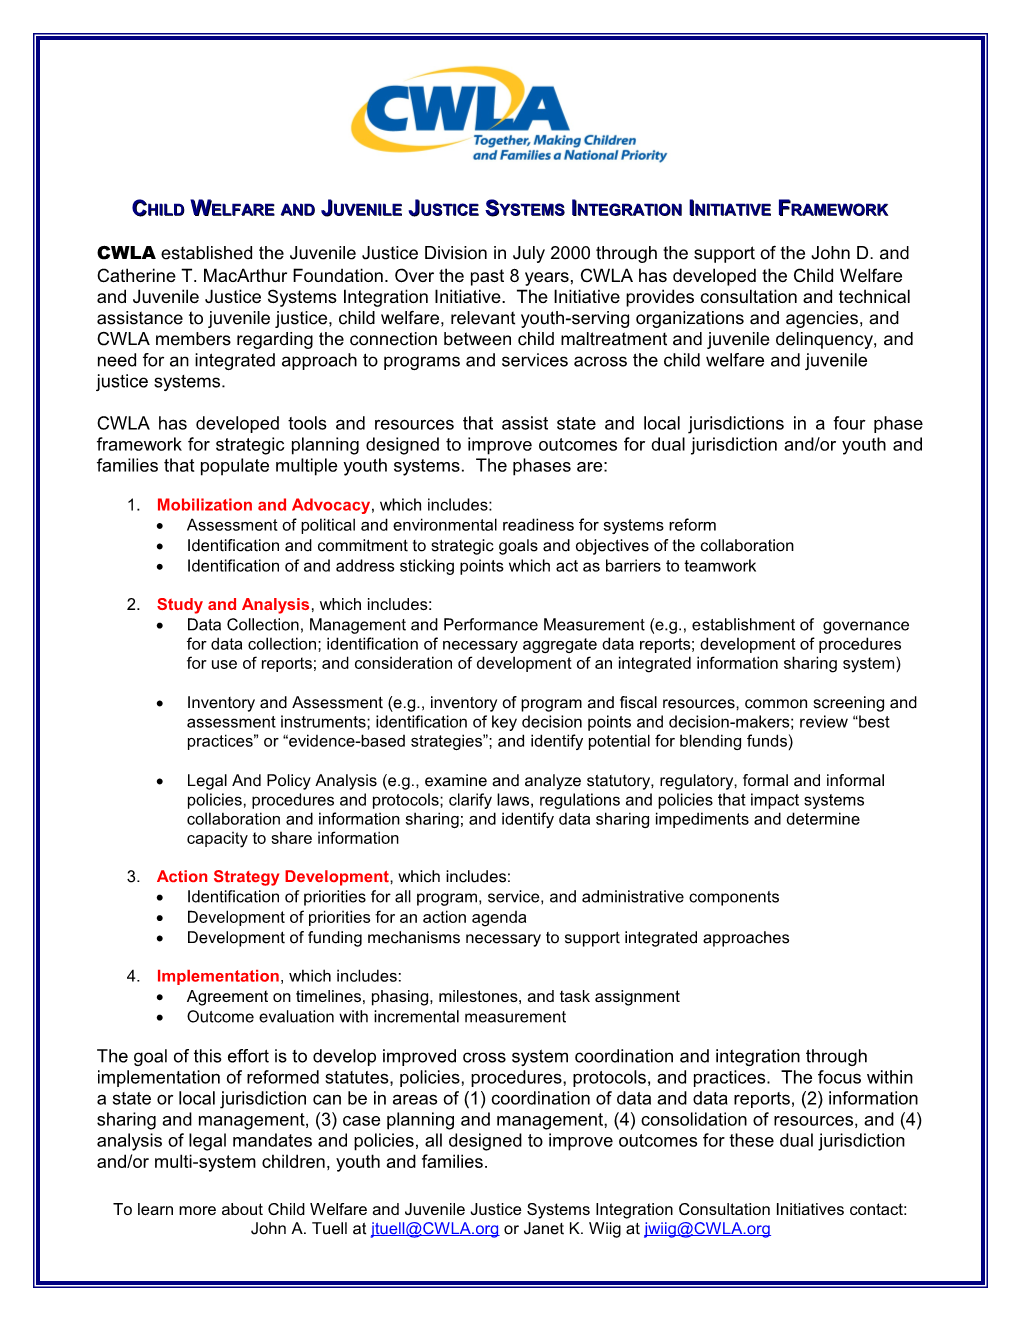 Child Welfare and Juvenile Justice Systems Integration Initiative Framework